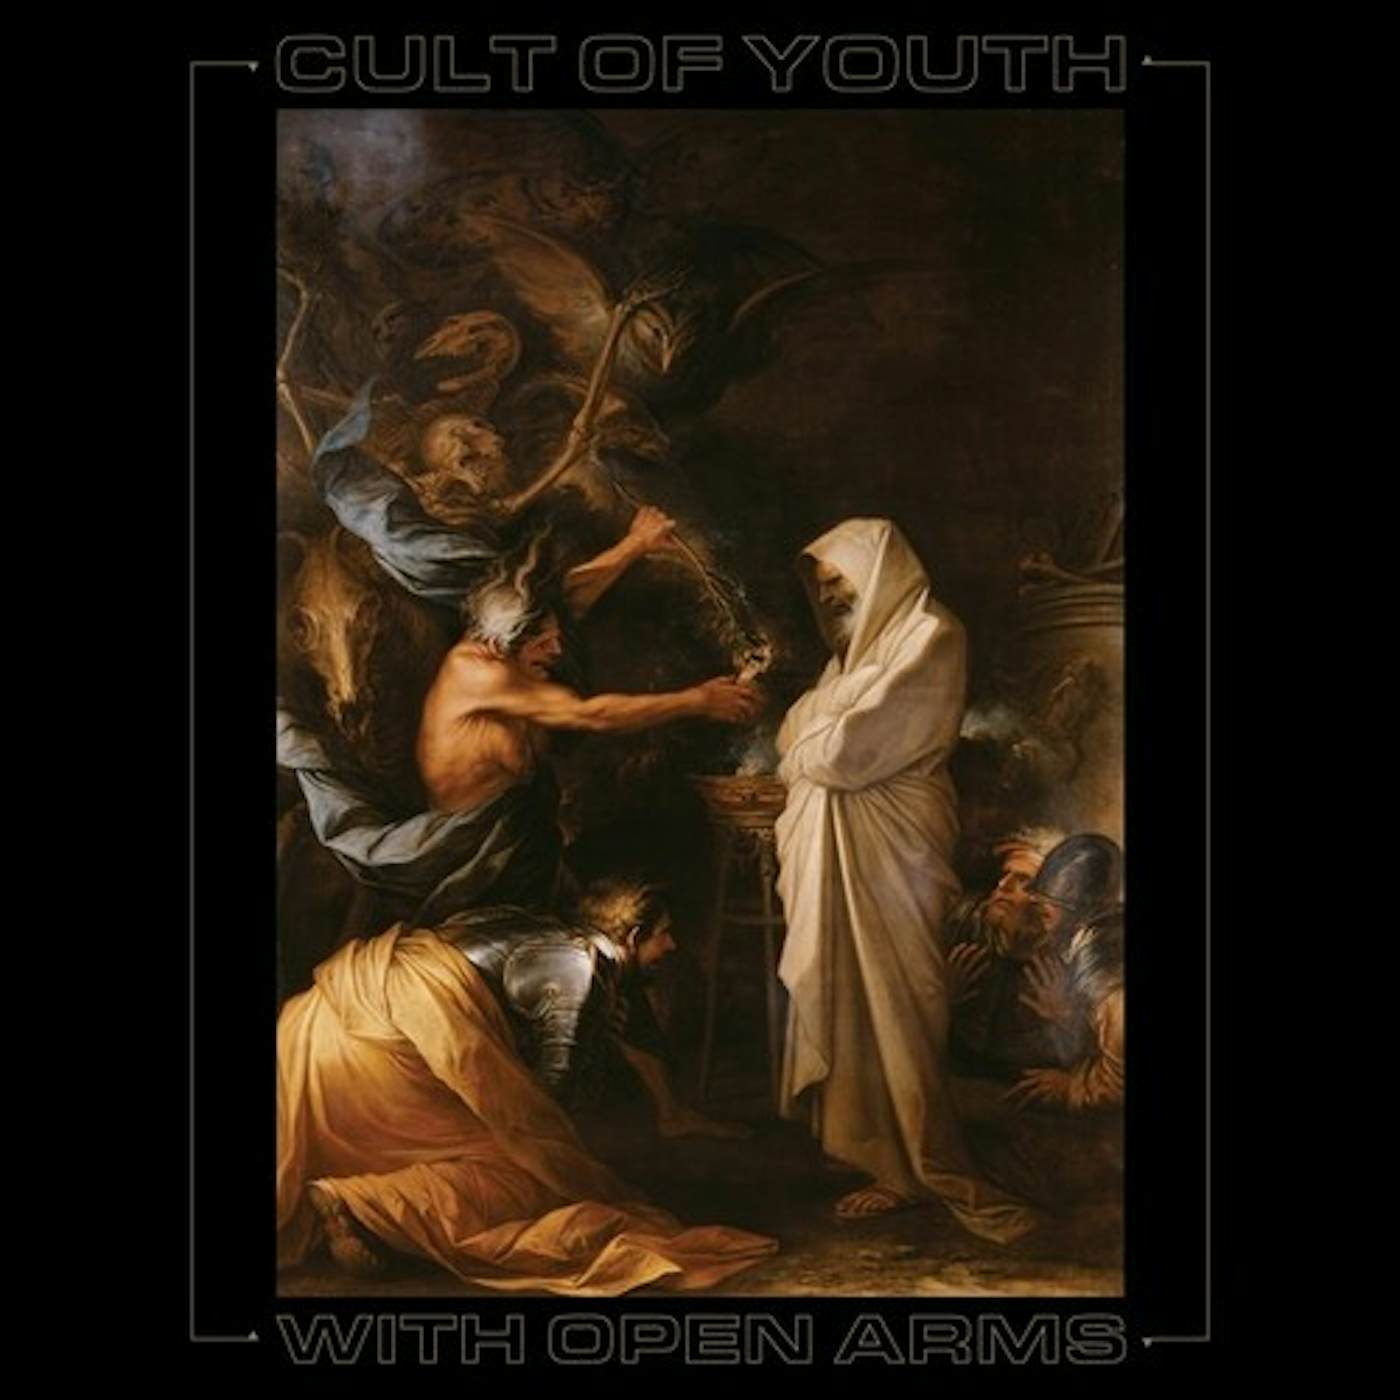 Cult of Youth With Open Arms Vinyl Record